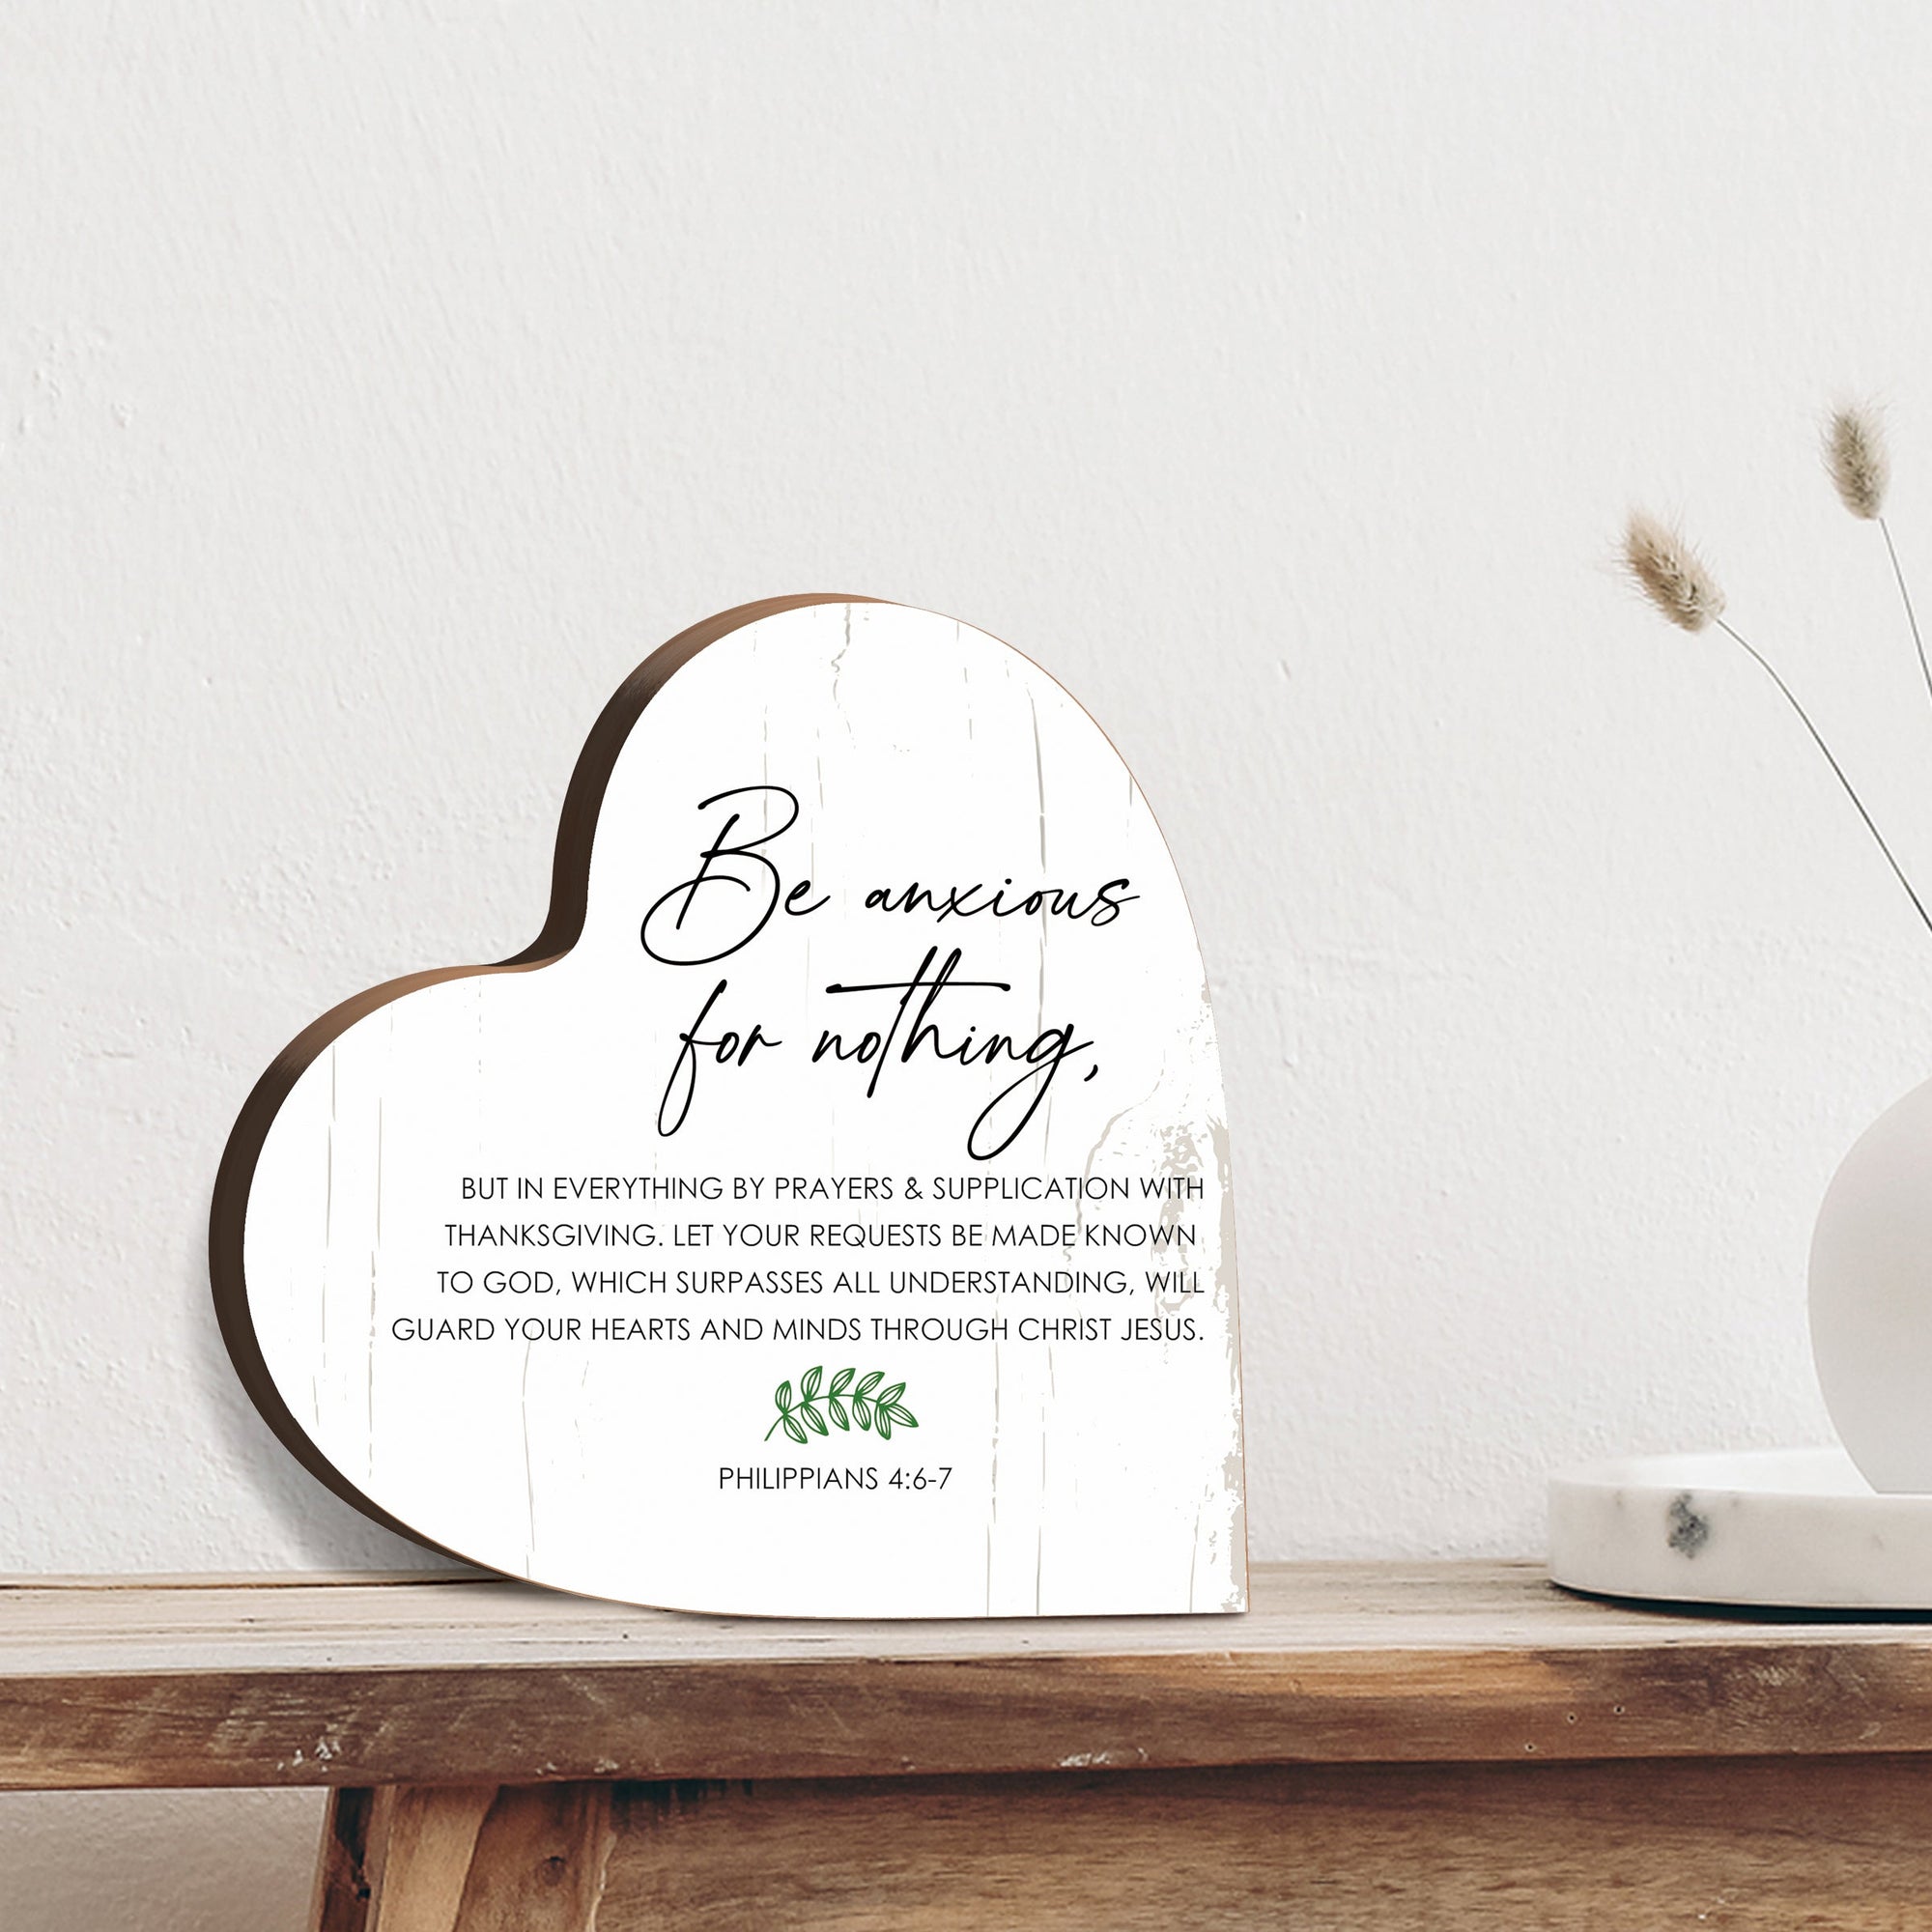 Elevate your space with an inspirational tabletop decoration - Heart block décor gift.